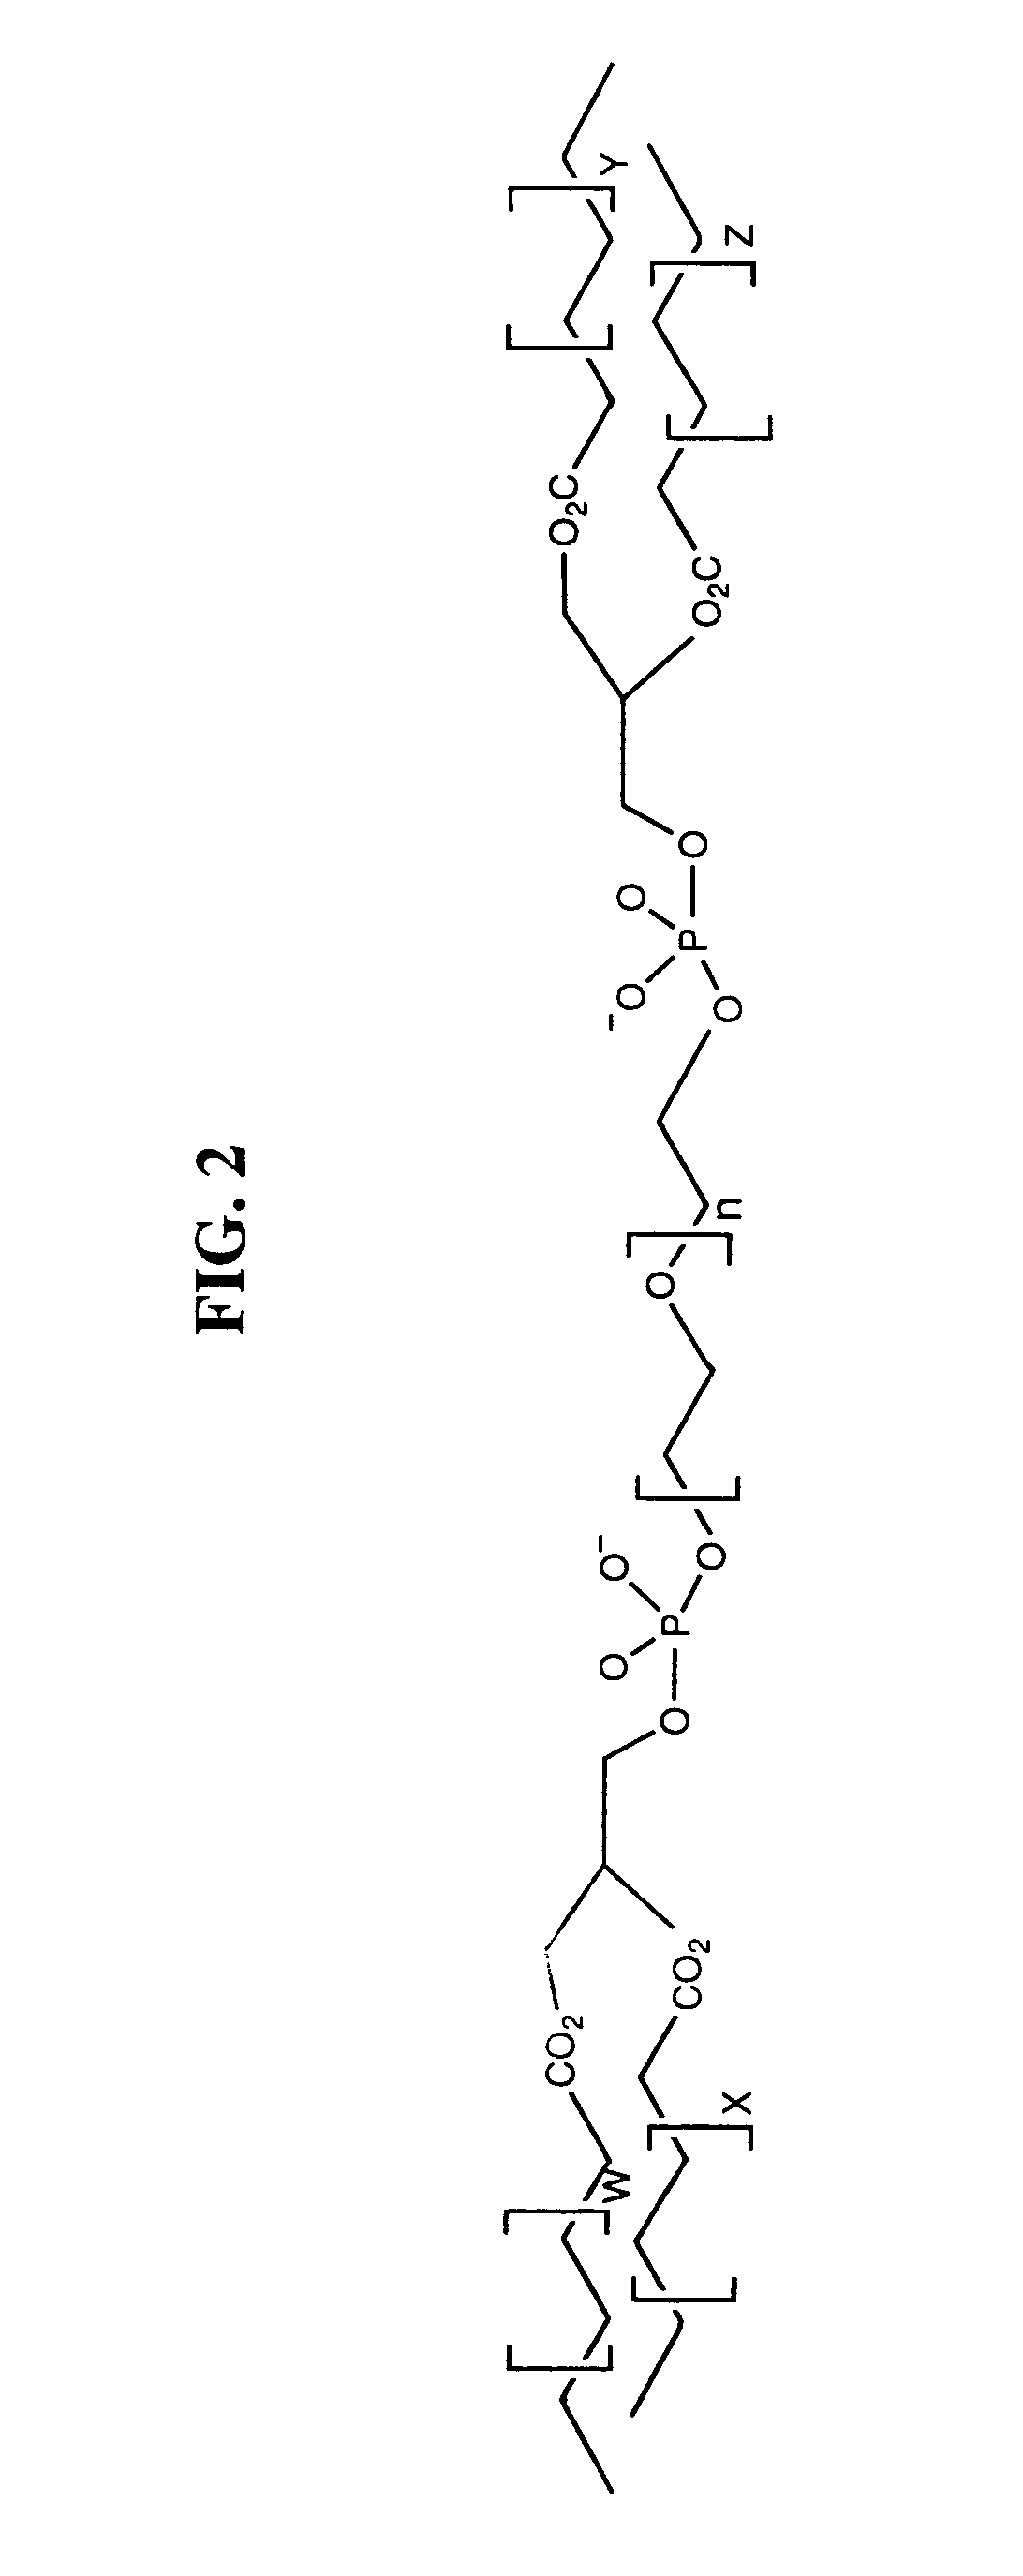 Amphiphilic materials and liposome formulations thereof